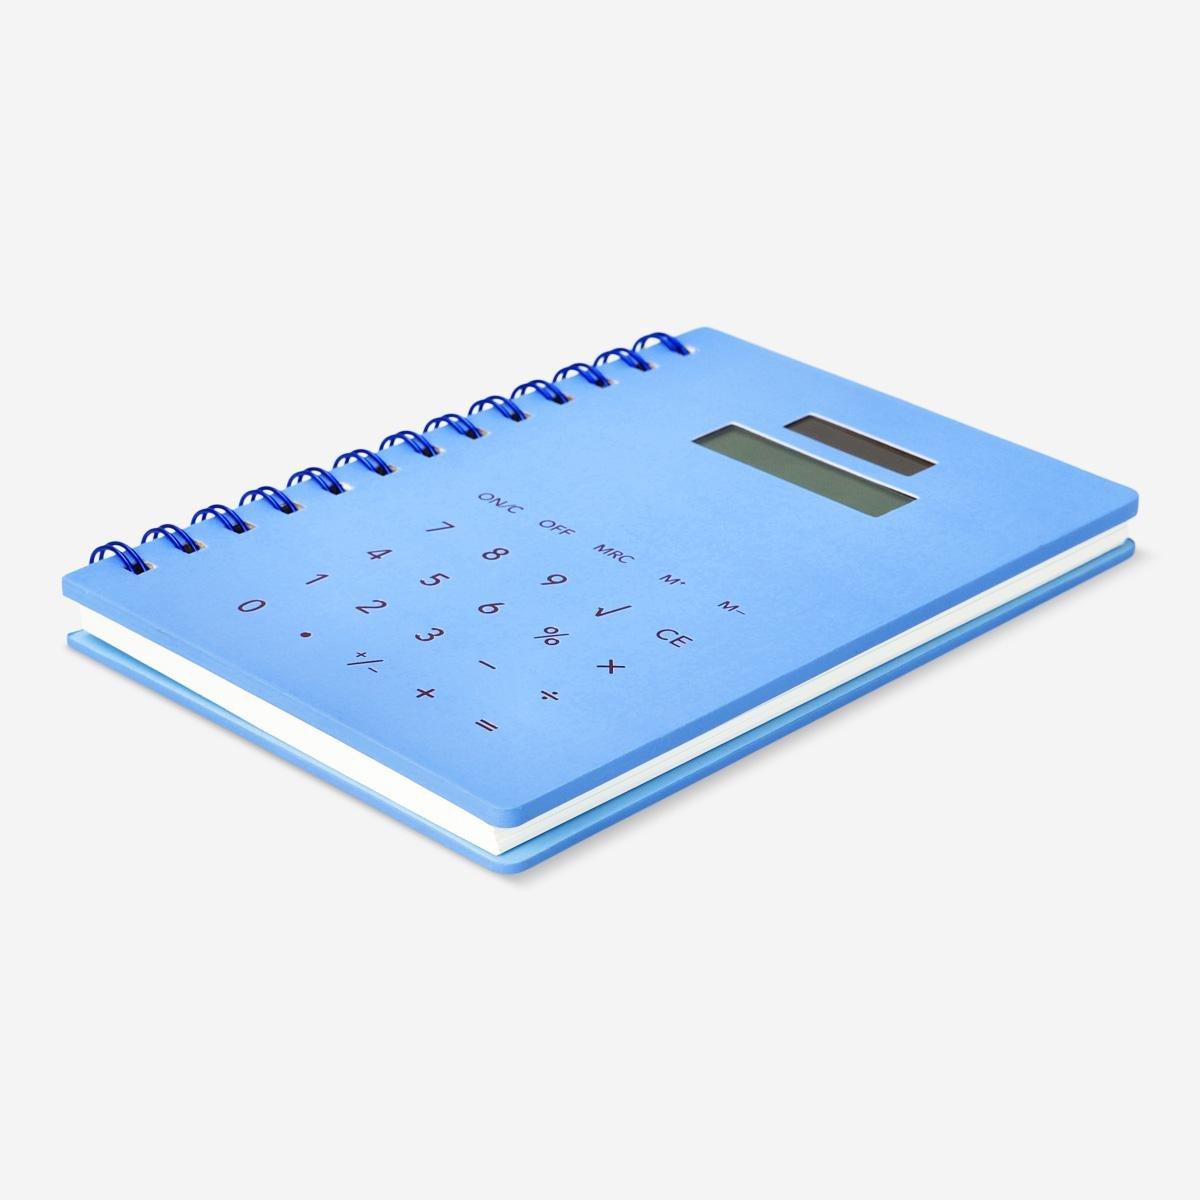 Notebook with calculator. Solar-powered